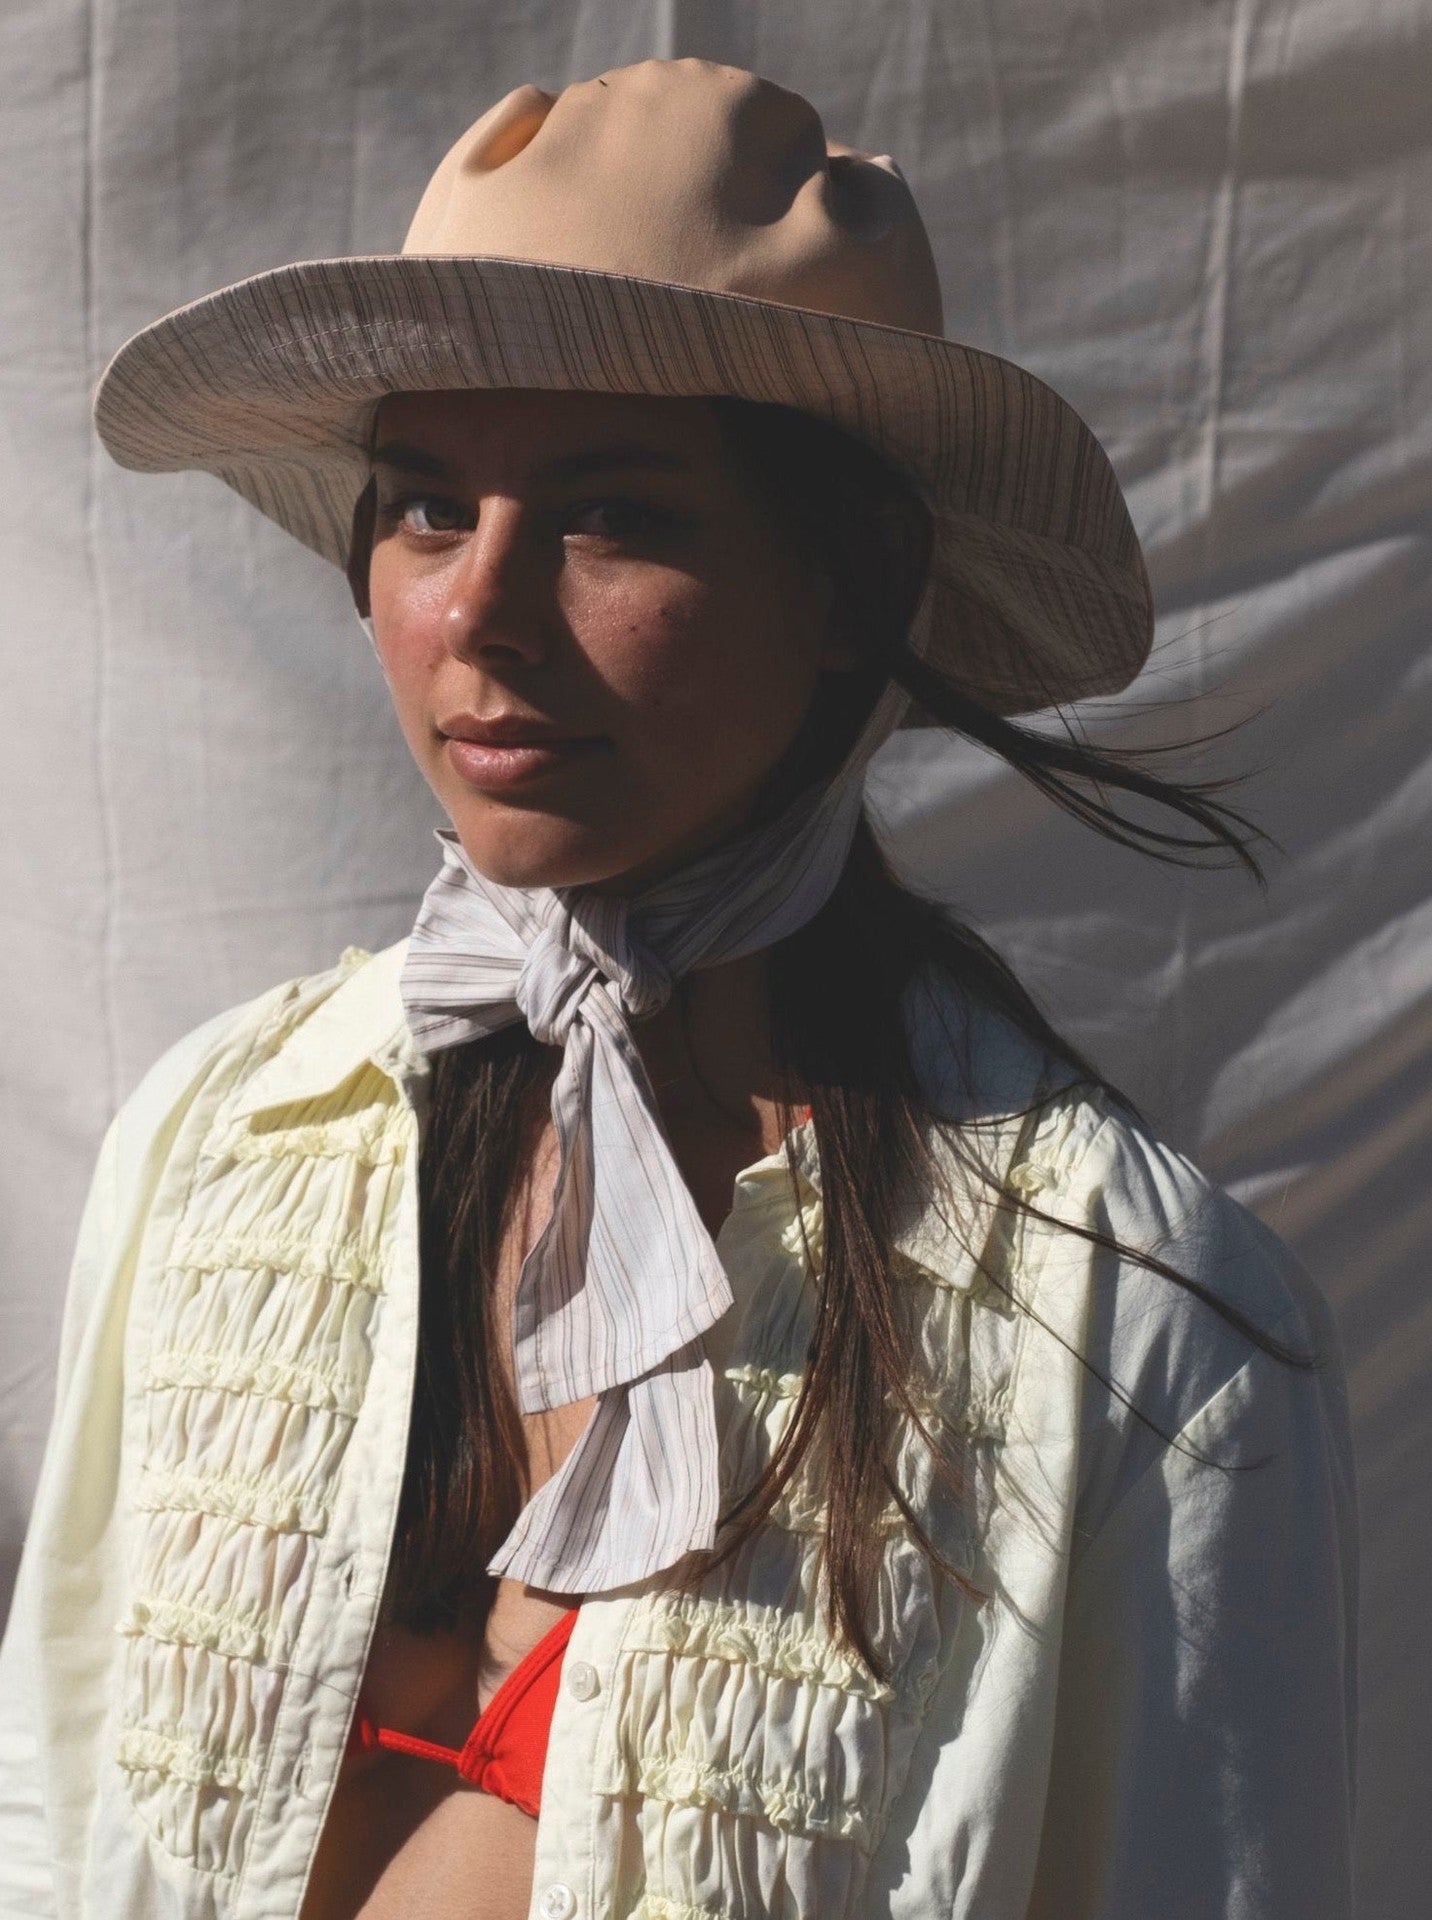 A woman in a Companion Classic Brim with Wide Ties – Peach & Stripe hat and bikini posing for a photo, showcasing summer staple fashion with a touch of recycled textiles.